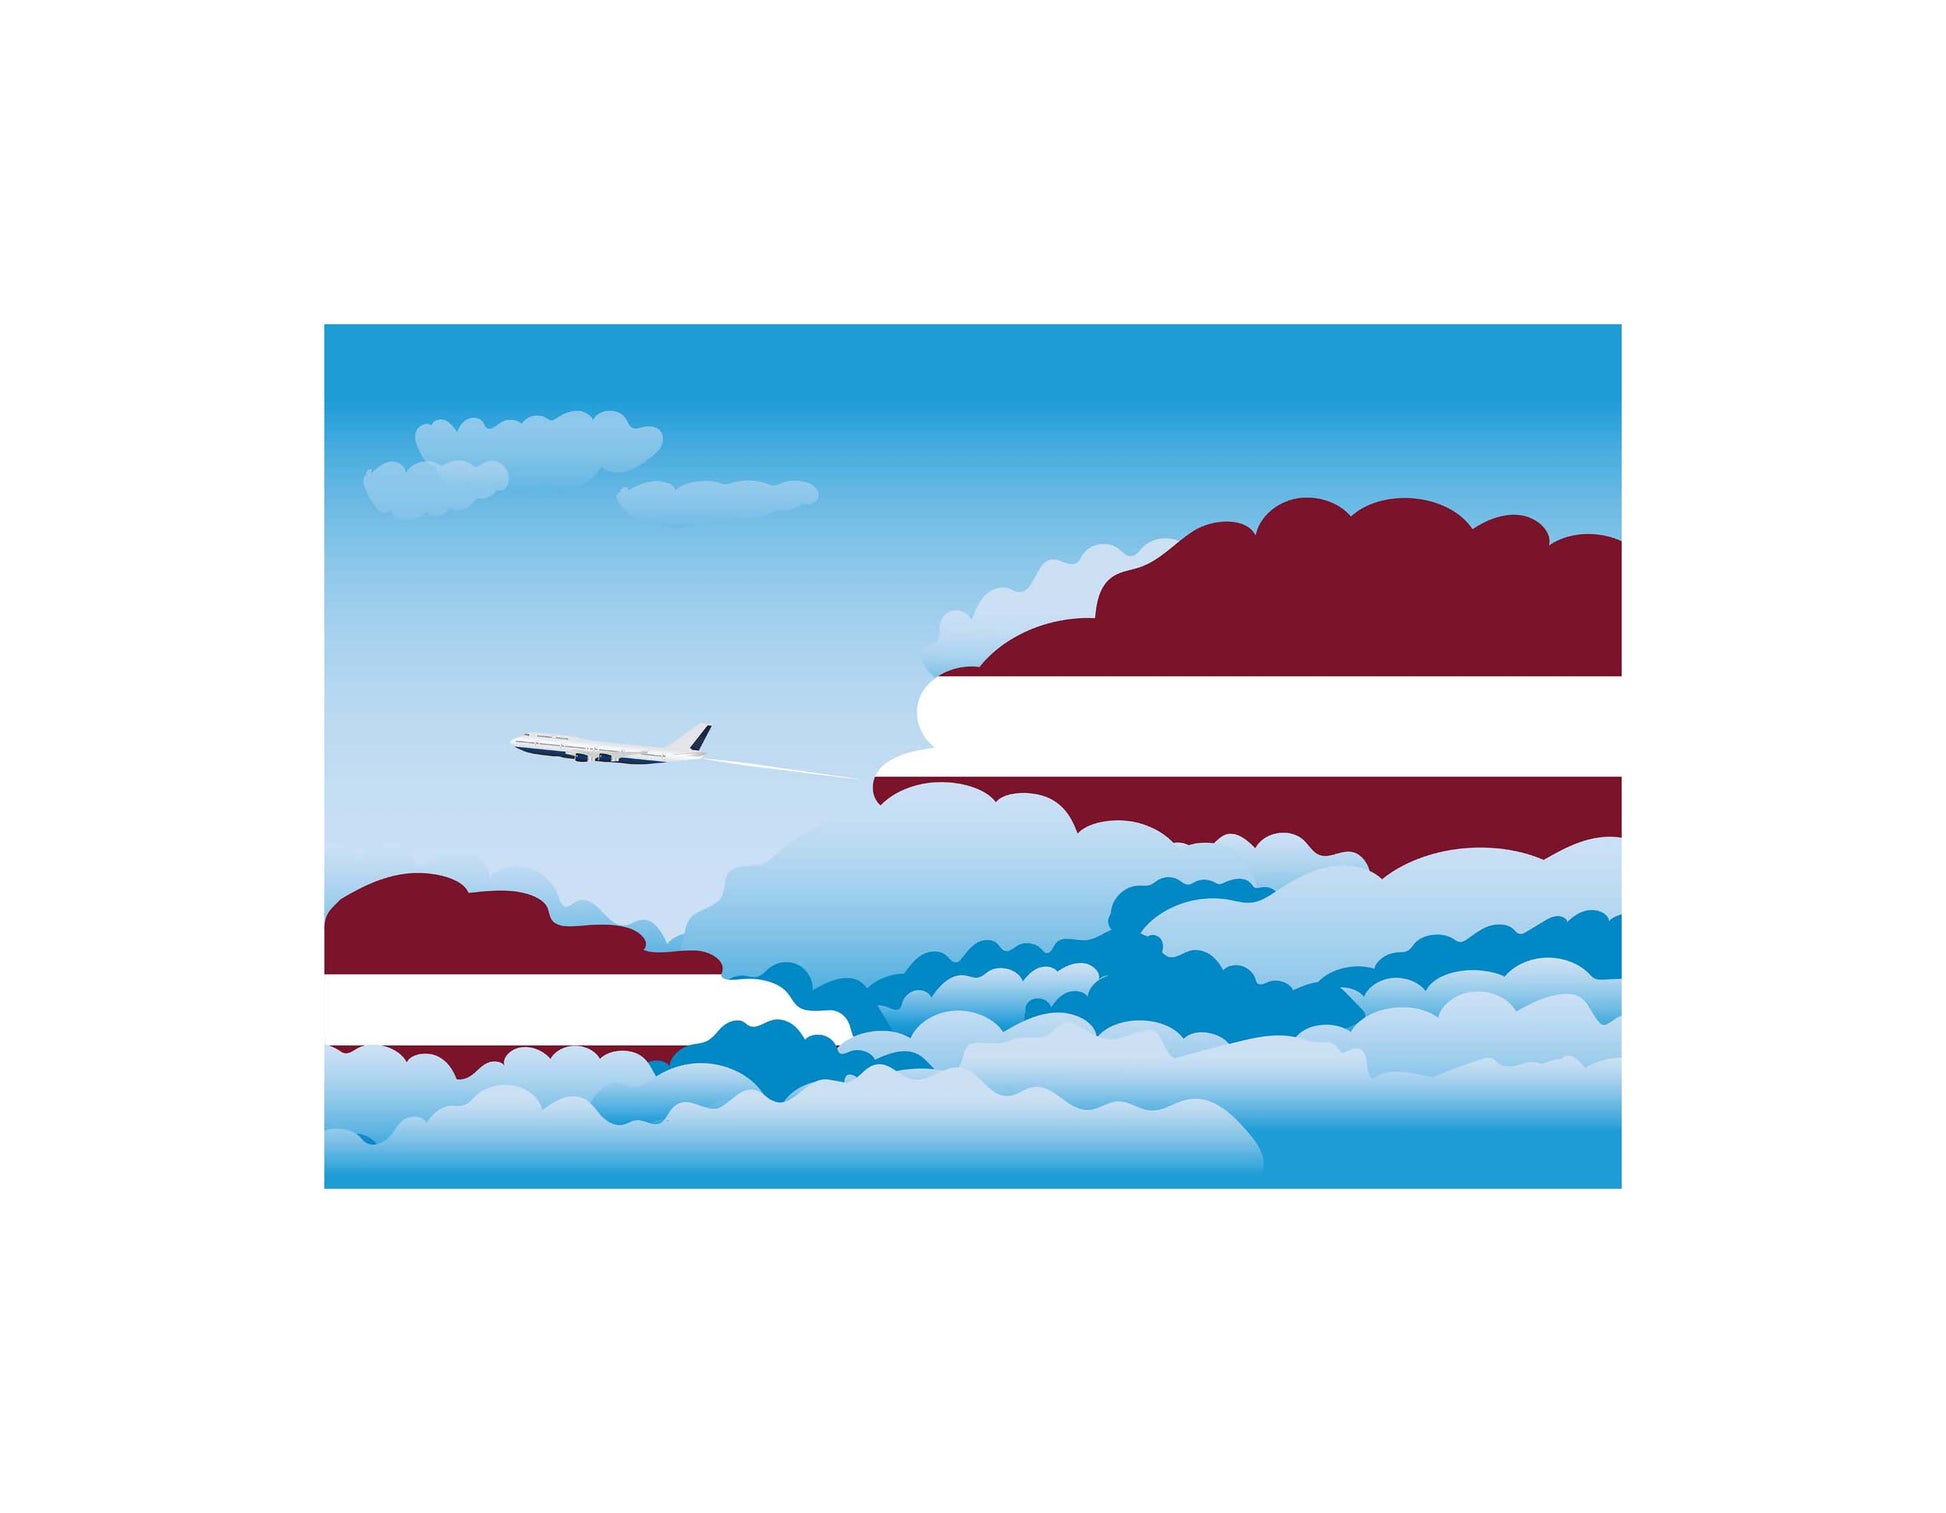 Latvia Flag Day Clouds Aeroplane Airport Flying Vector Illustration